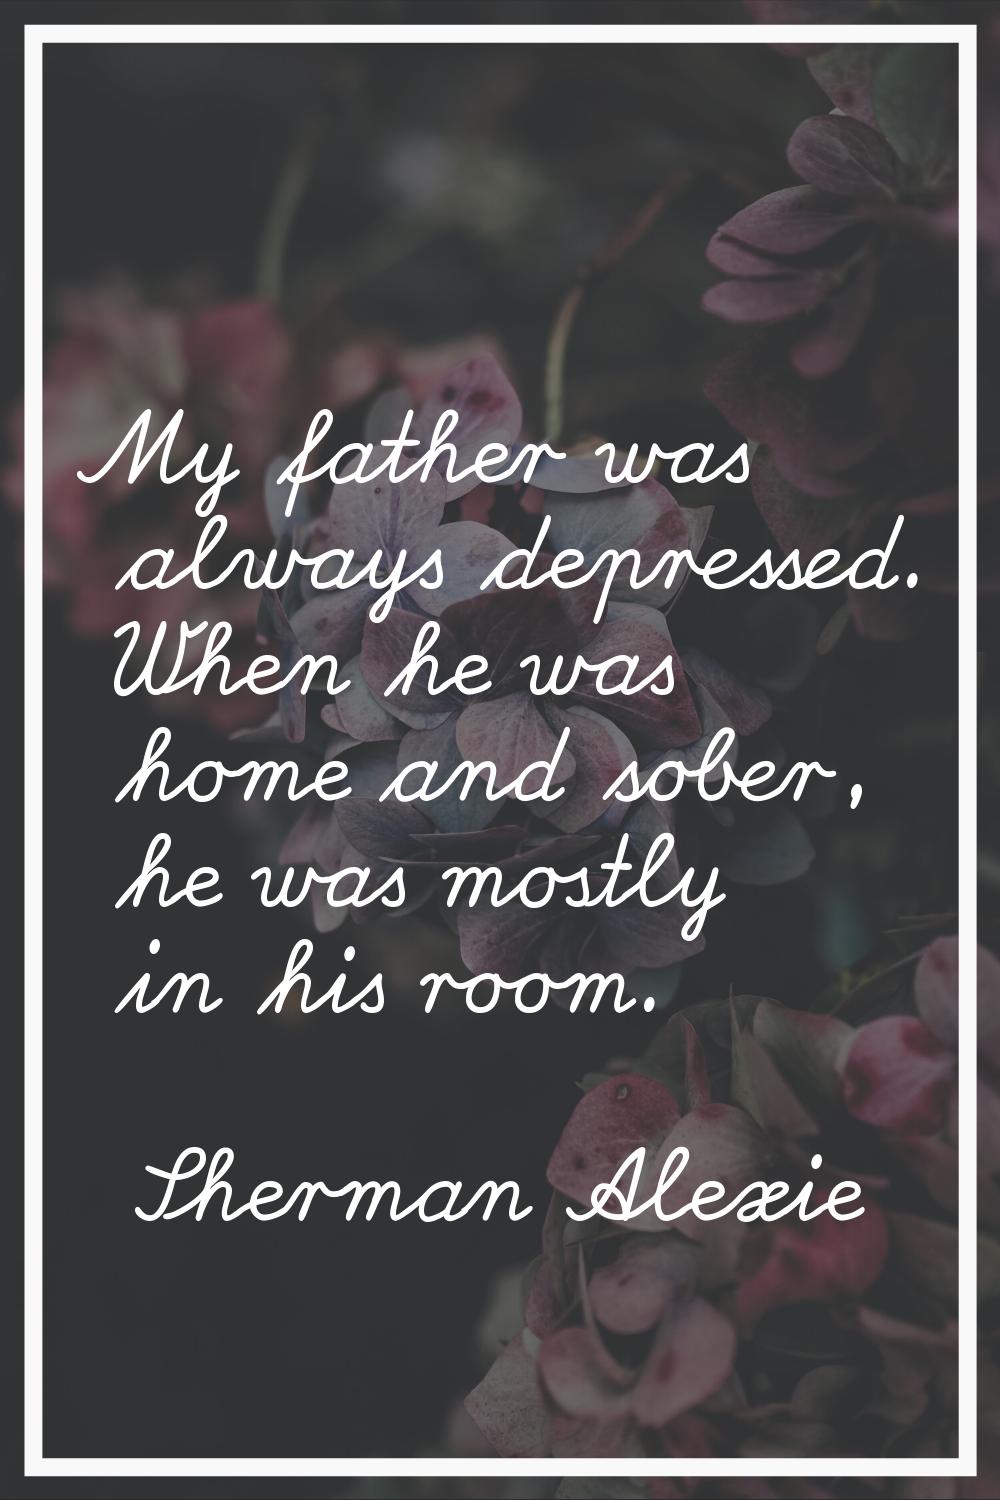 My father was always depressed. When he was home and sober, he was mostly in his room.